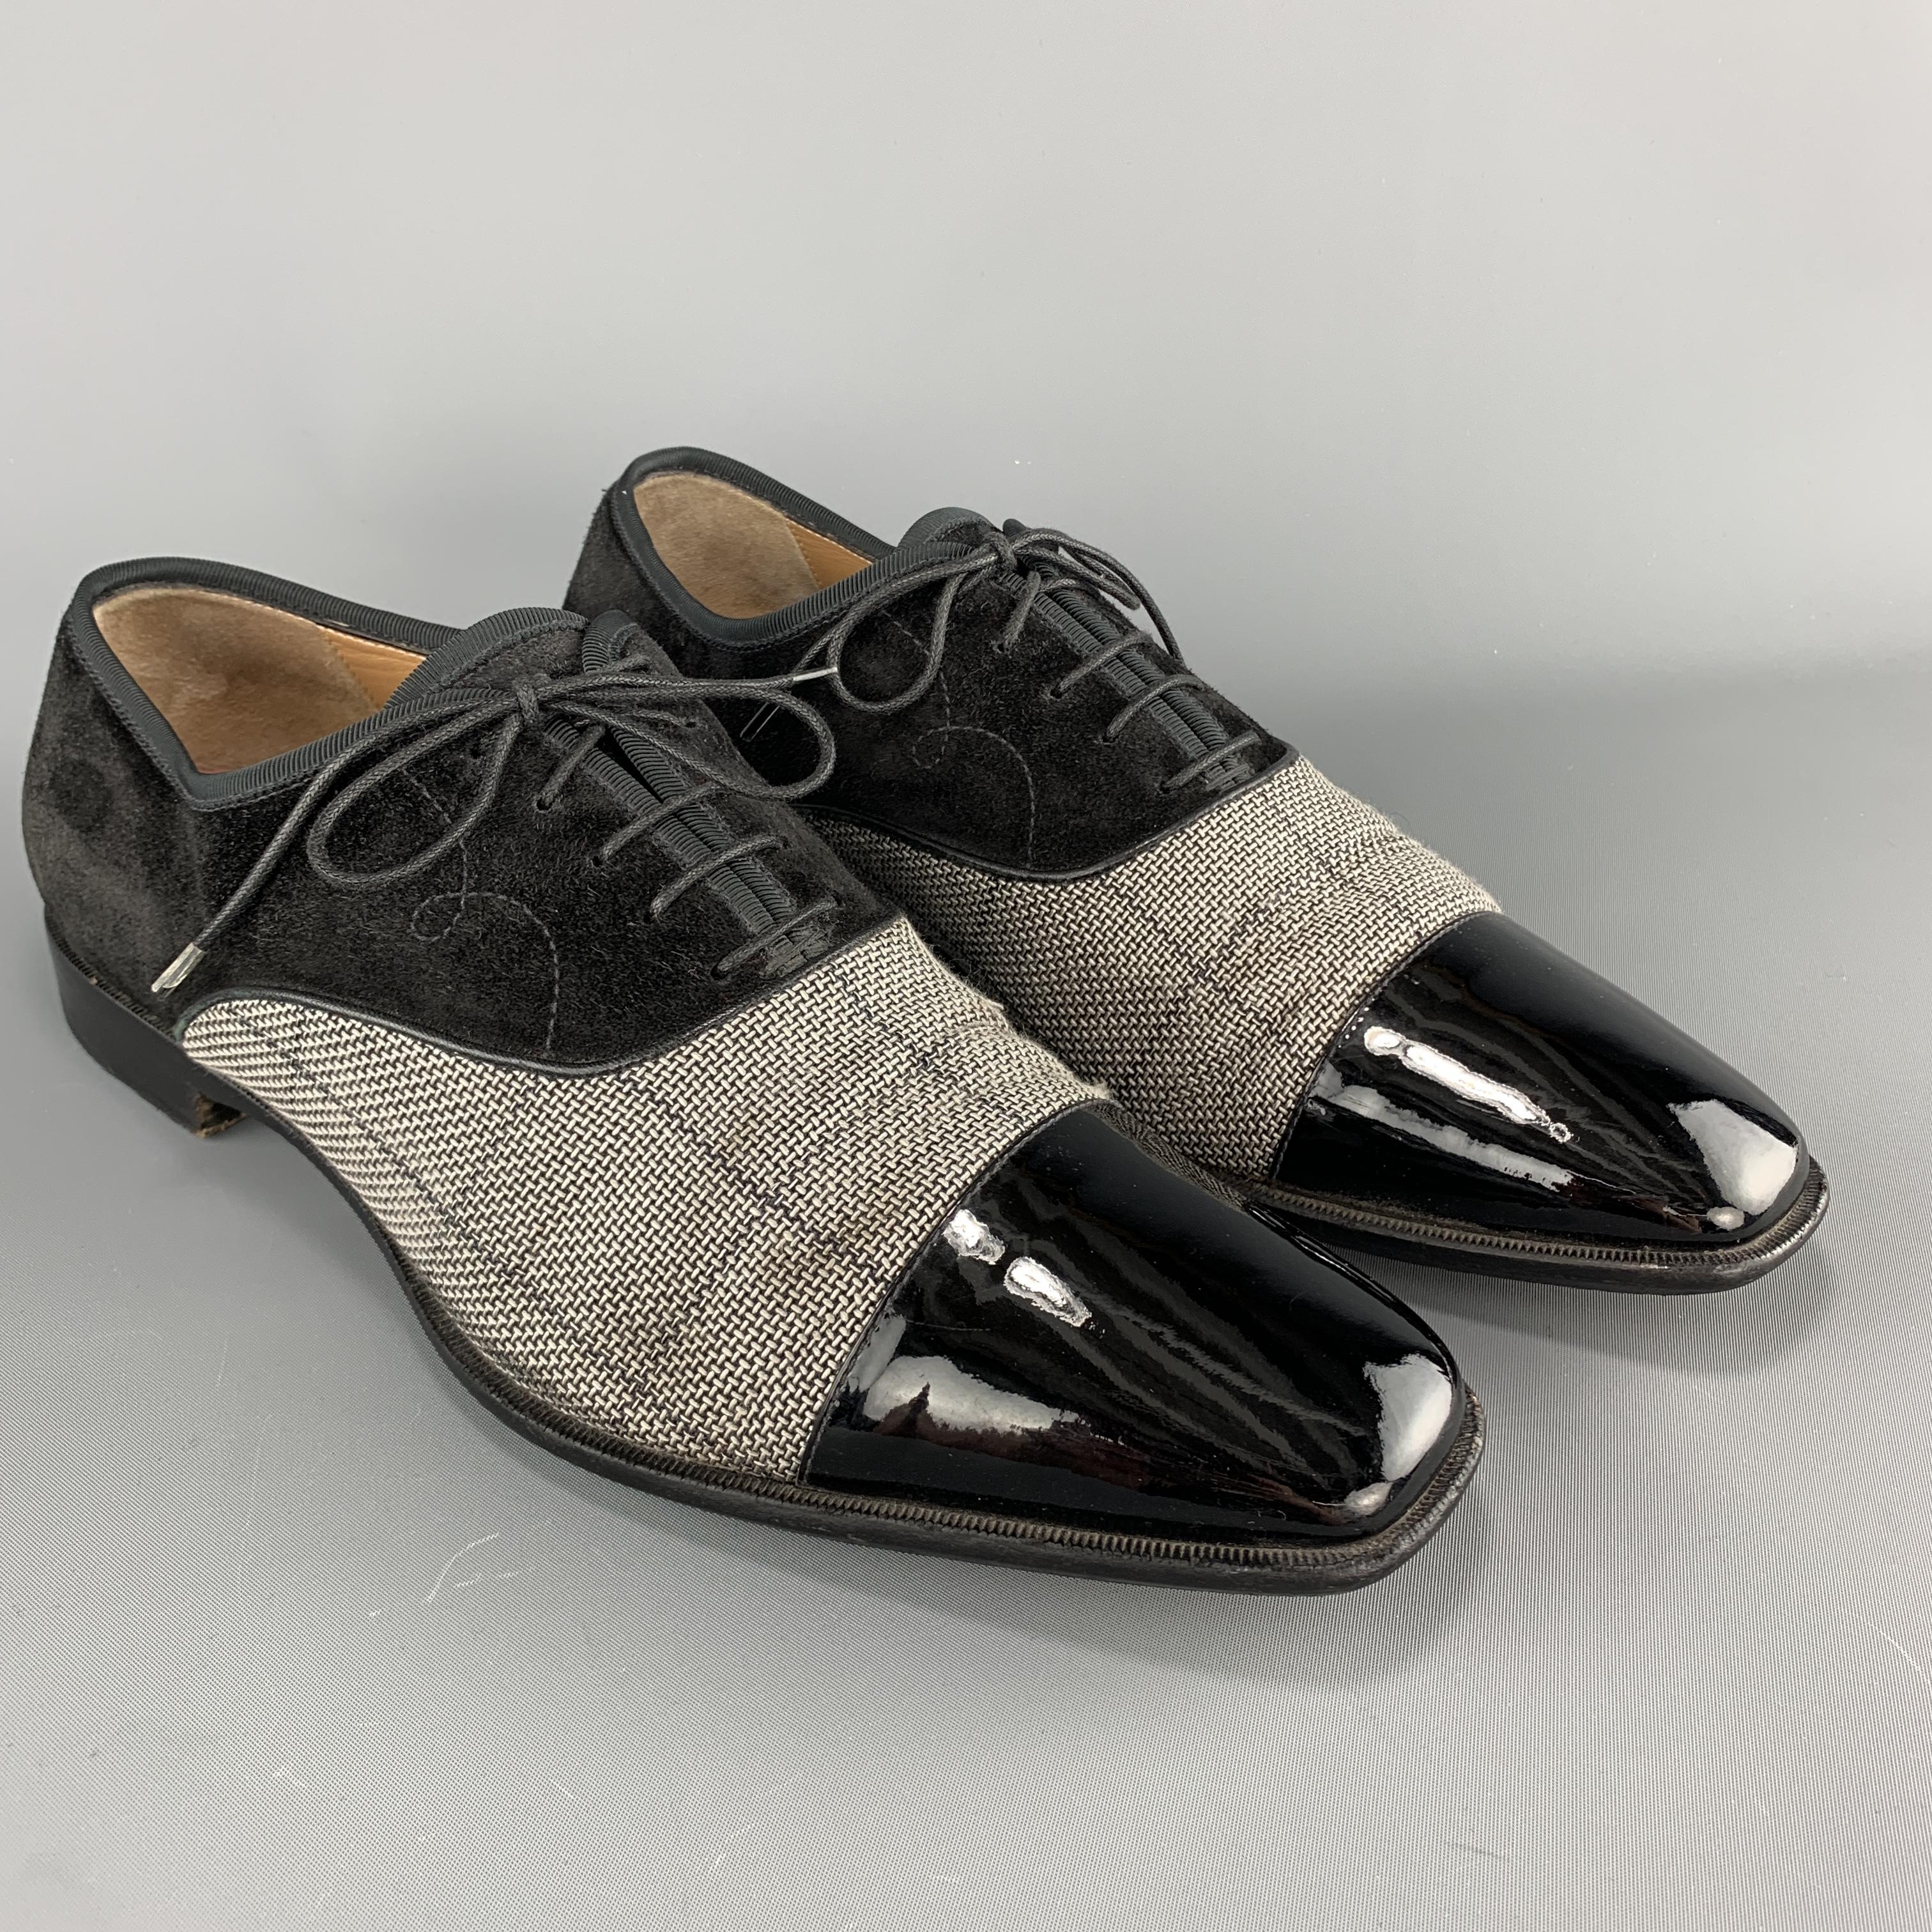 CHRISTIAN LOUBOUTIN dress shoes come in black suede with a silver gray woven fabric panel and patent leather toe cap. Wear throughout. As-is. Made in Italy.

Fair Pre-Owned Condition.
Marked: IT 43.5

Outsole: 12.25 x 4.25 in.